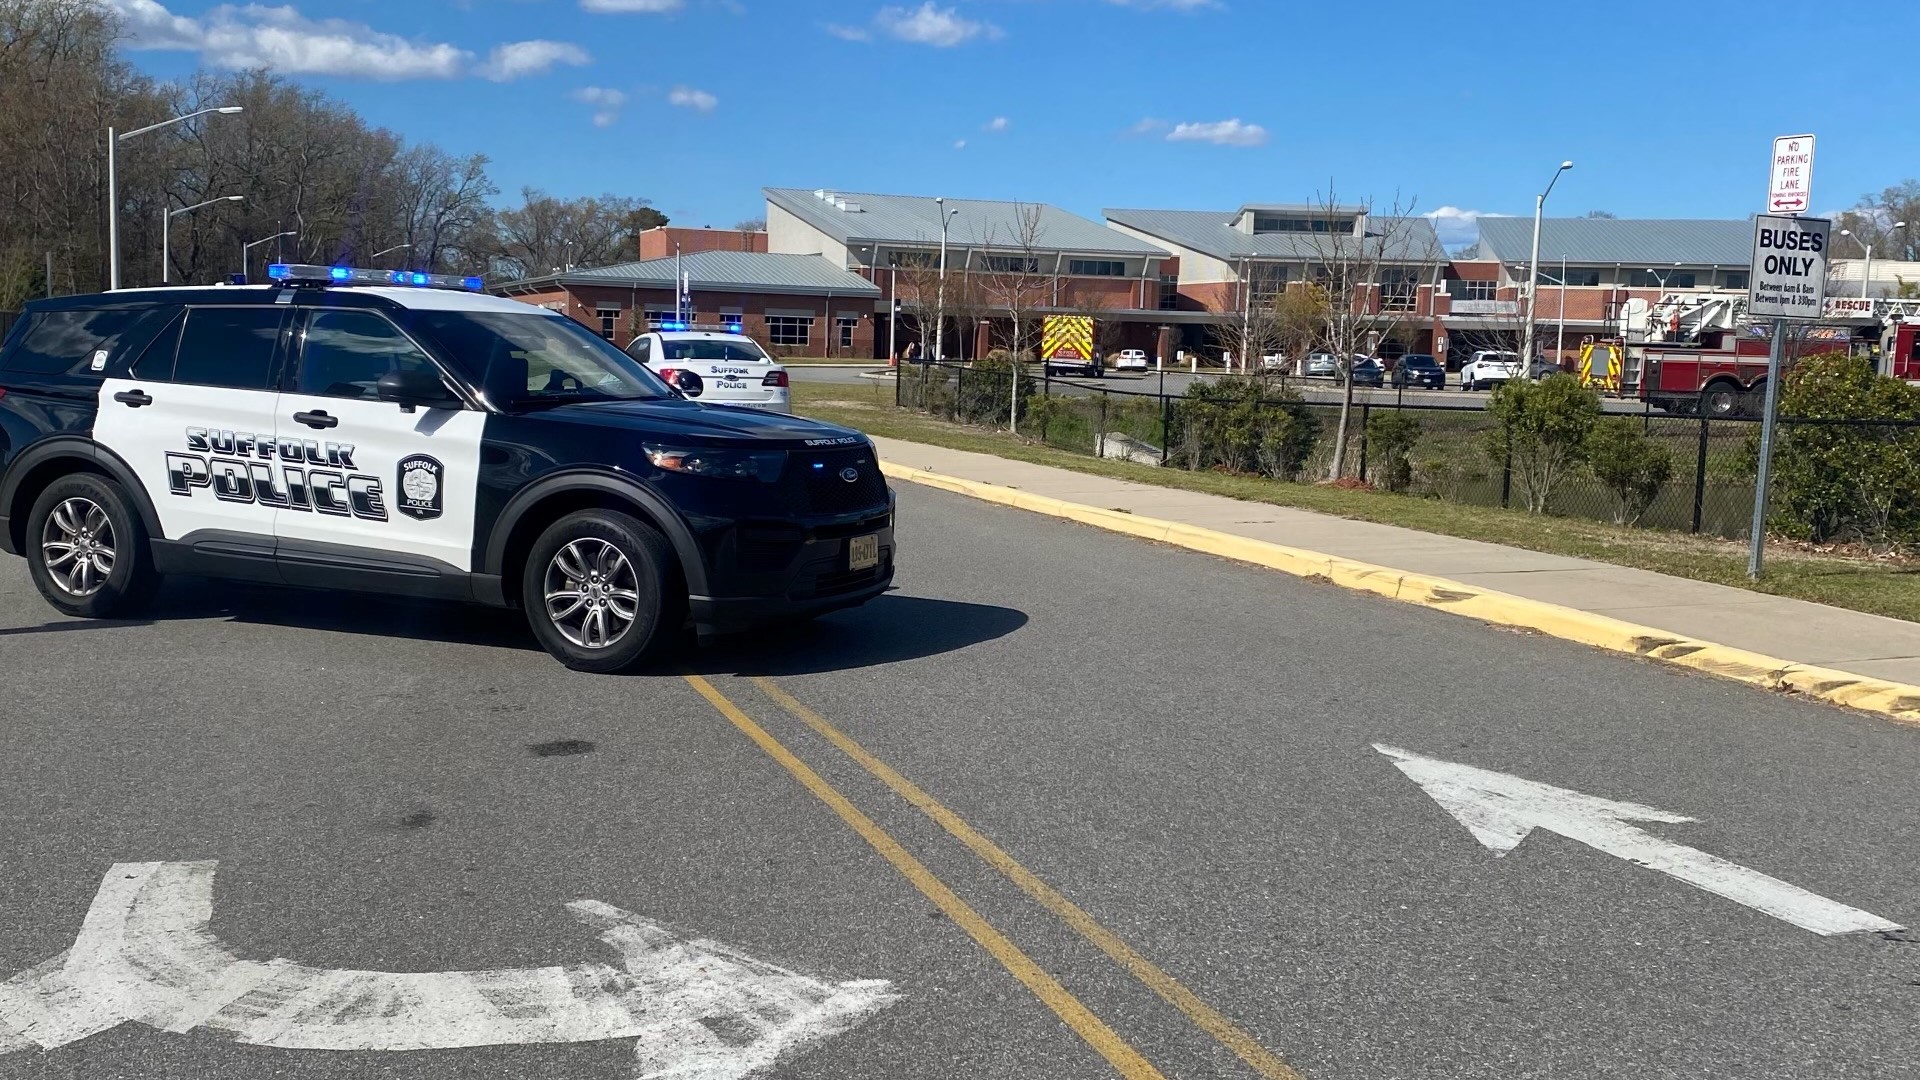 Colonel Fred Cherry Middle School was evacuated Wednesday morning while Suffolk authorities investigated a bomb threat, city officials said.